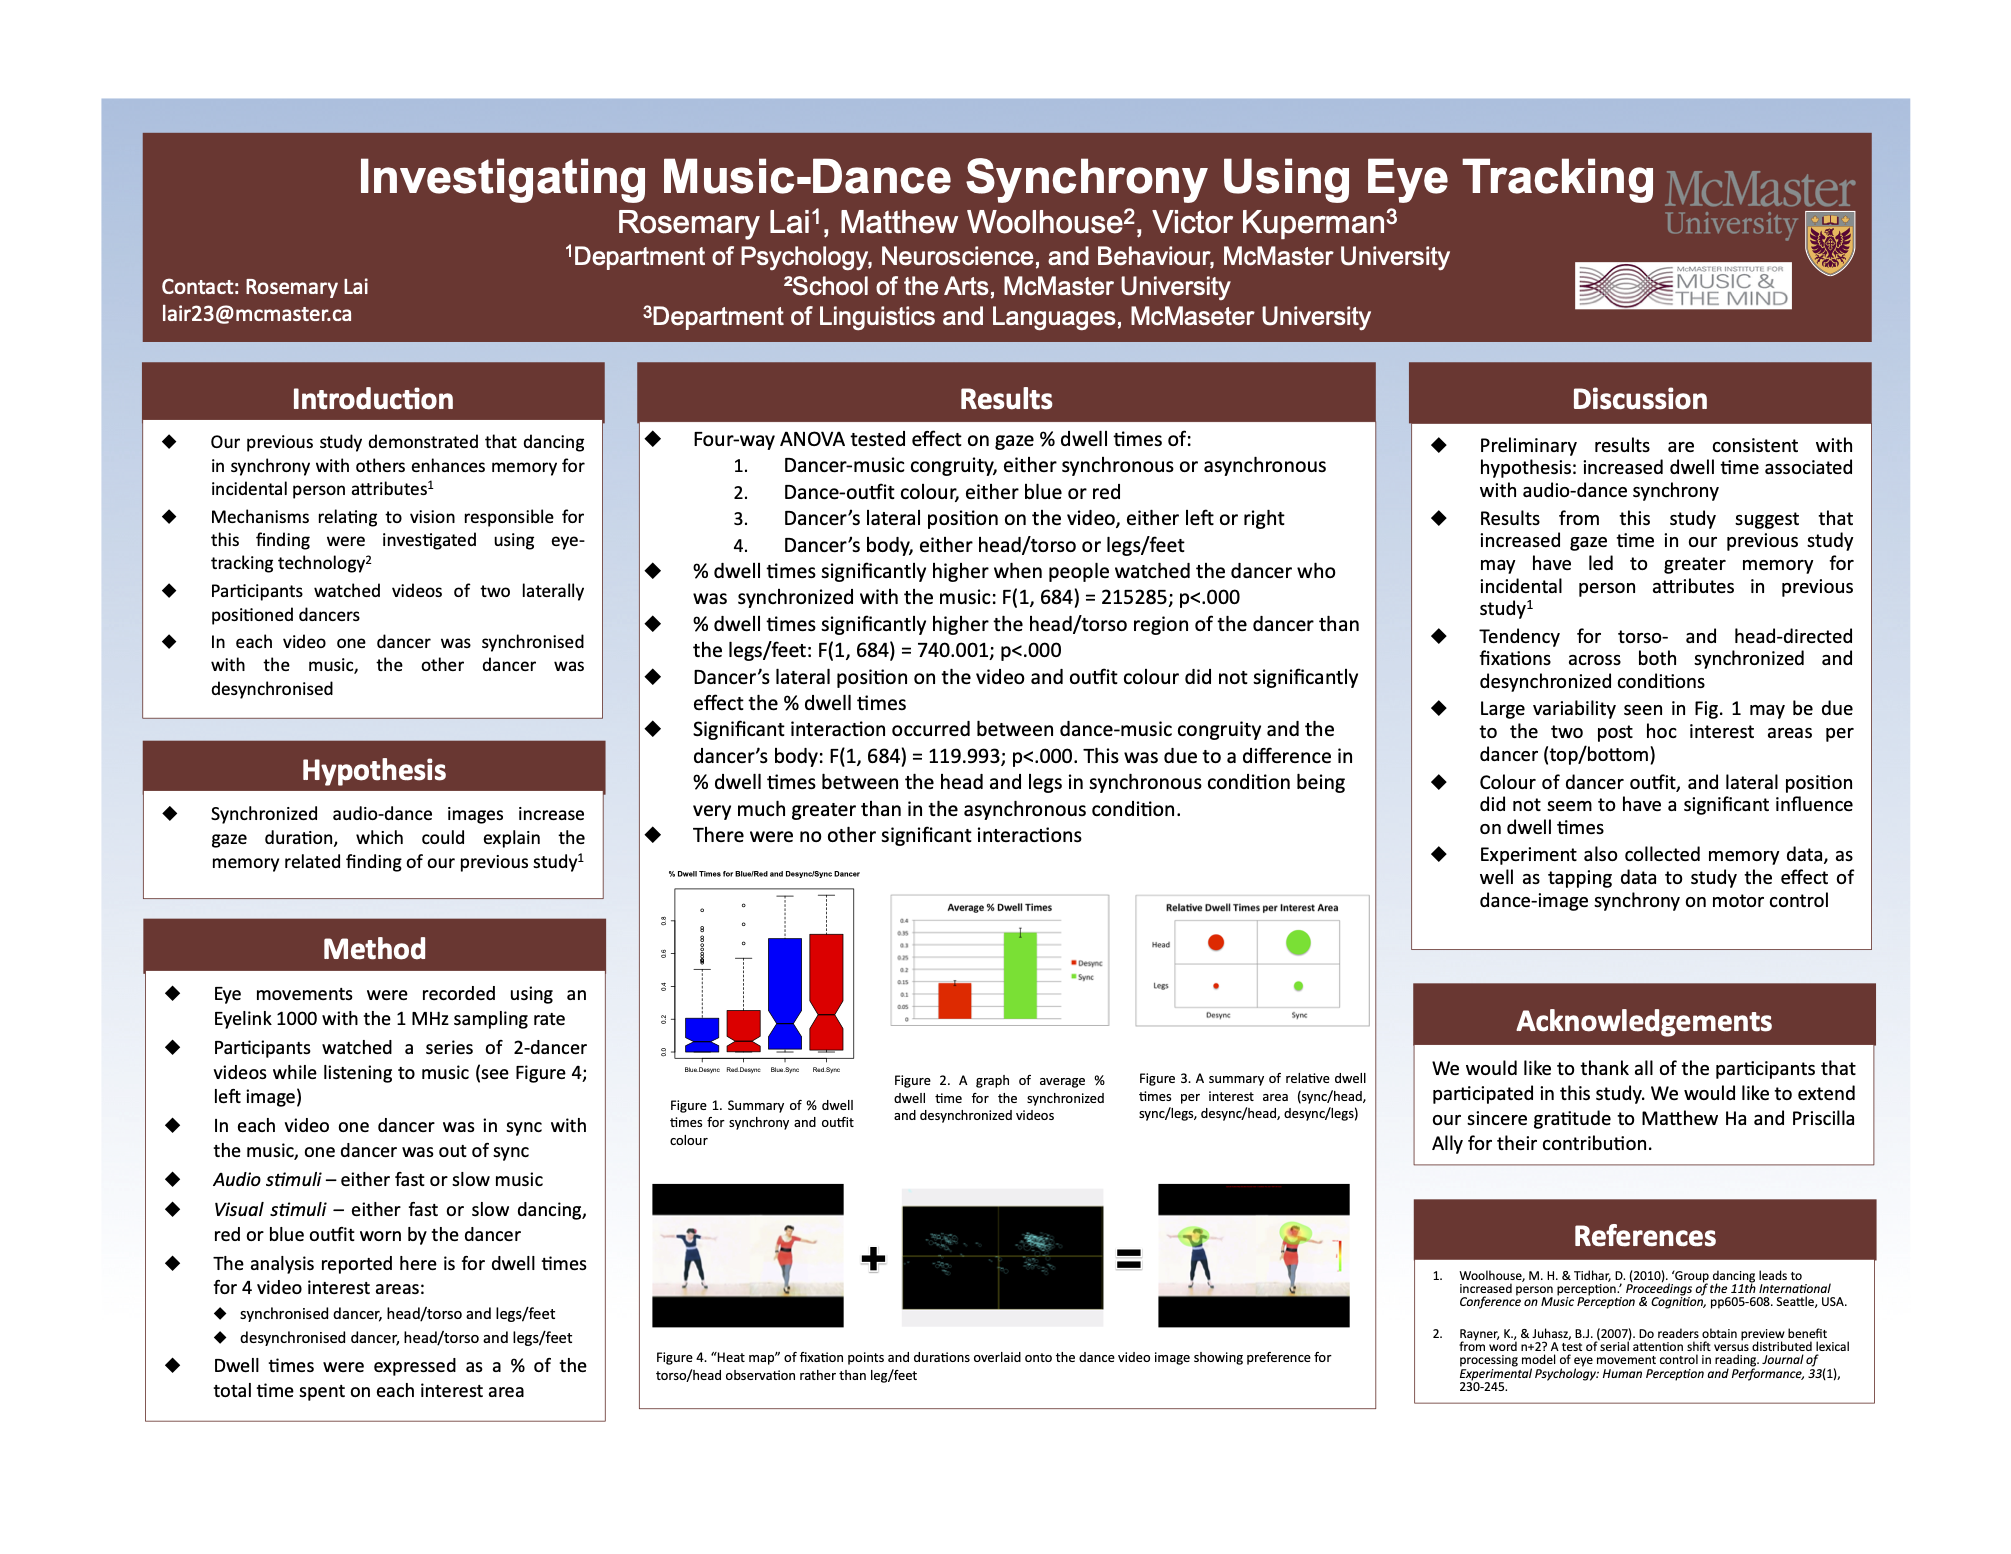 Poster for "Investigating Music-Dance Synchrony Using Eye-Tracking" by Rosemary Lai, Matthew Woolhouse, and Victor Kuperman.